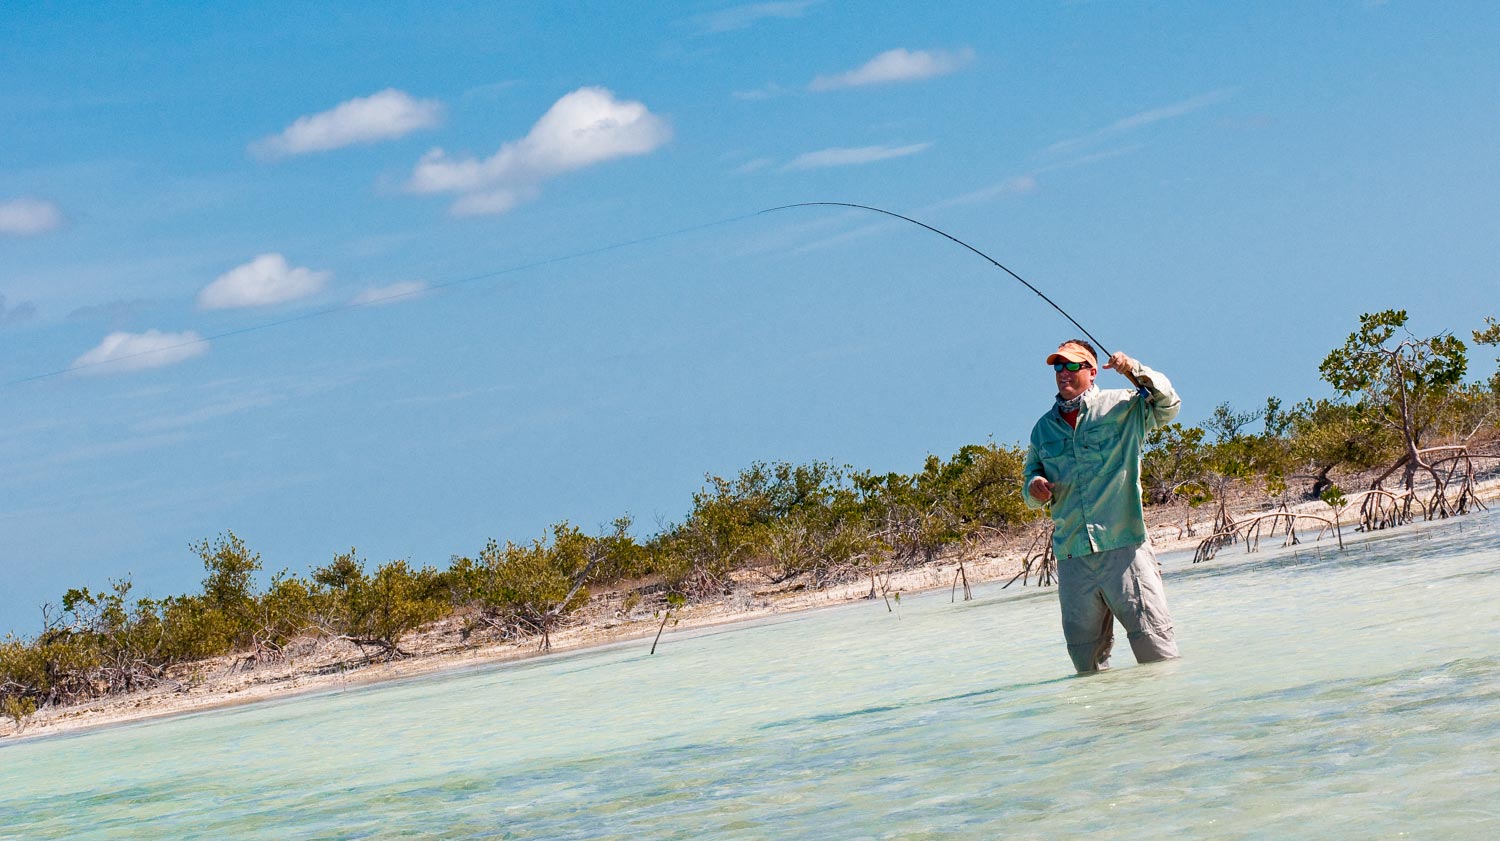 Guide to Saltwater Fishing Knots for Gear & Fly Fishing: Knots for